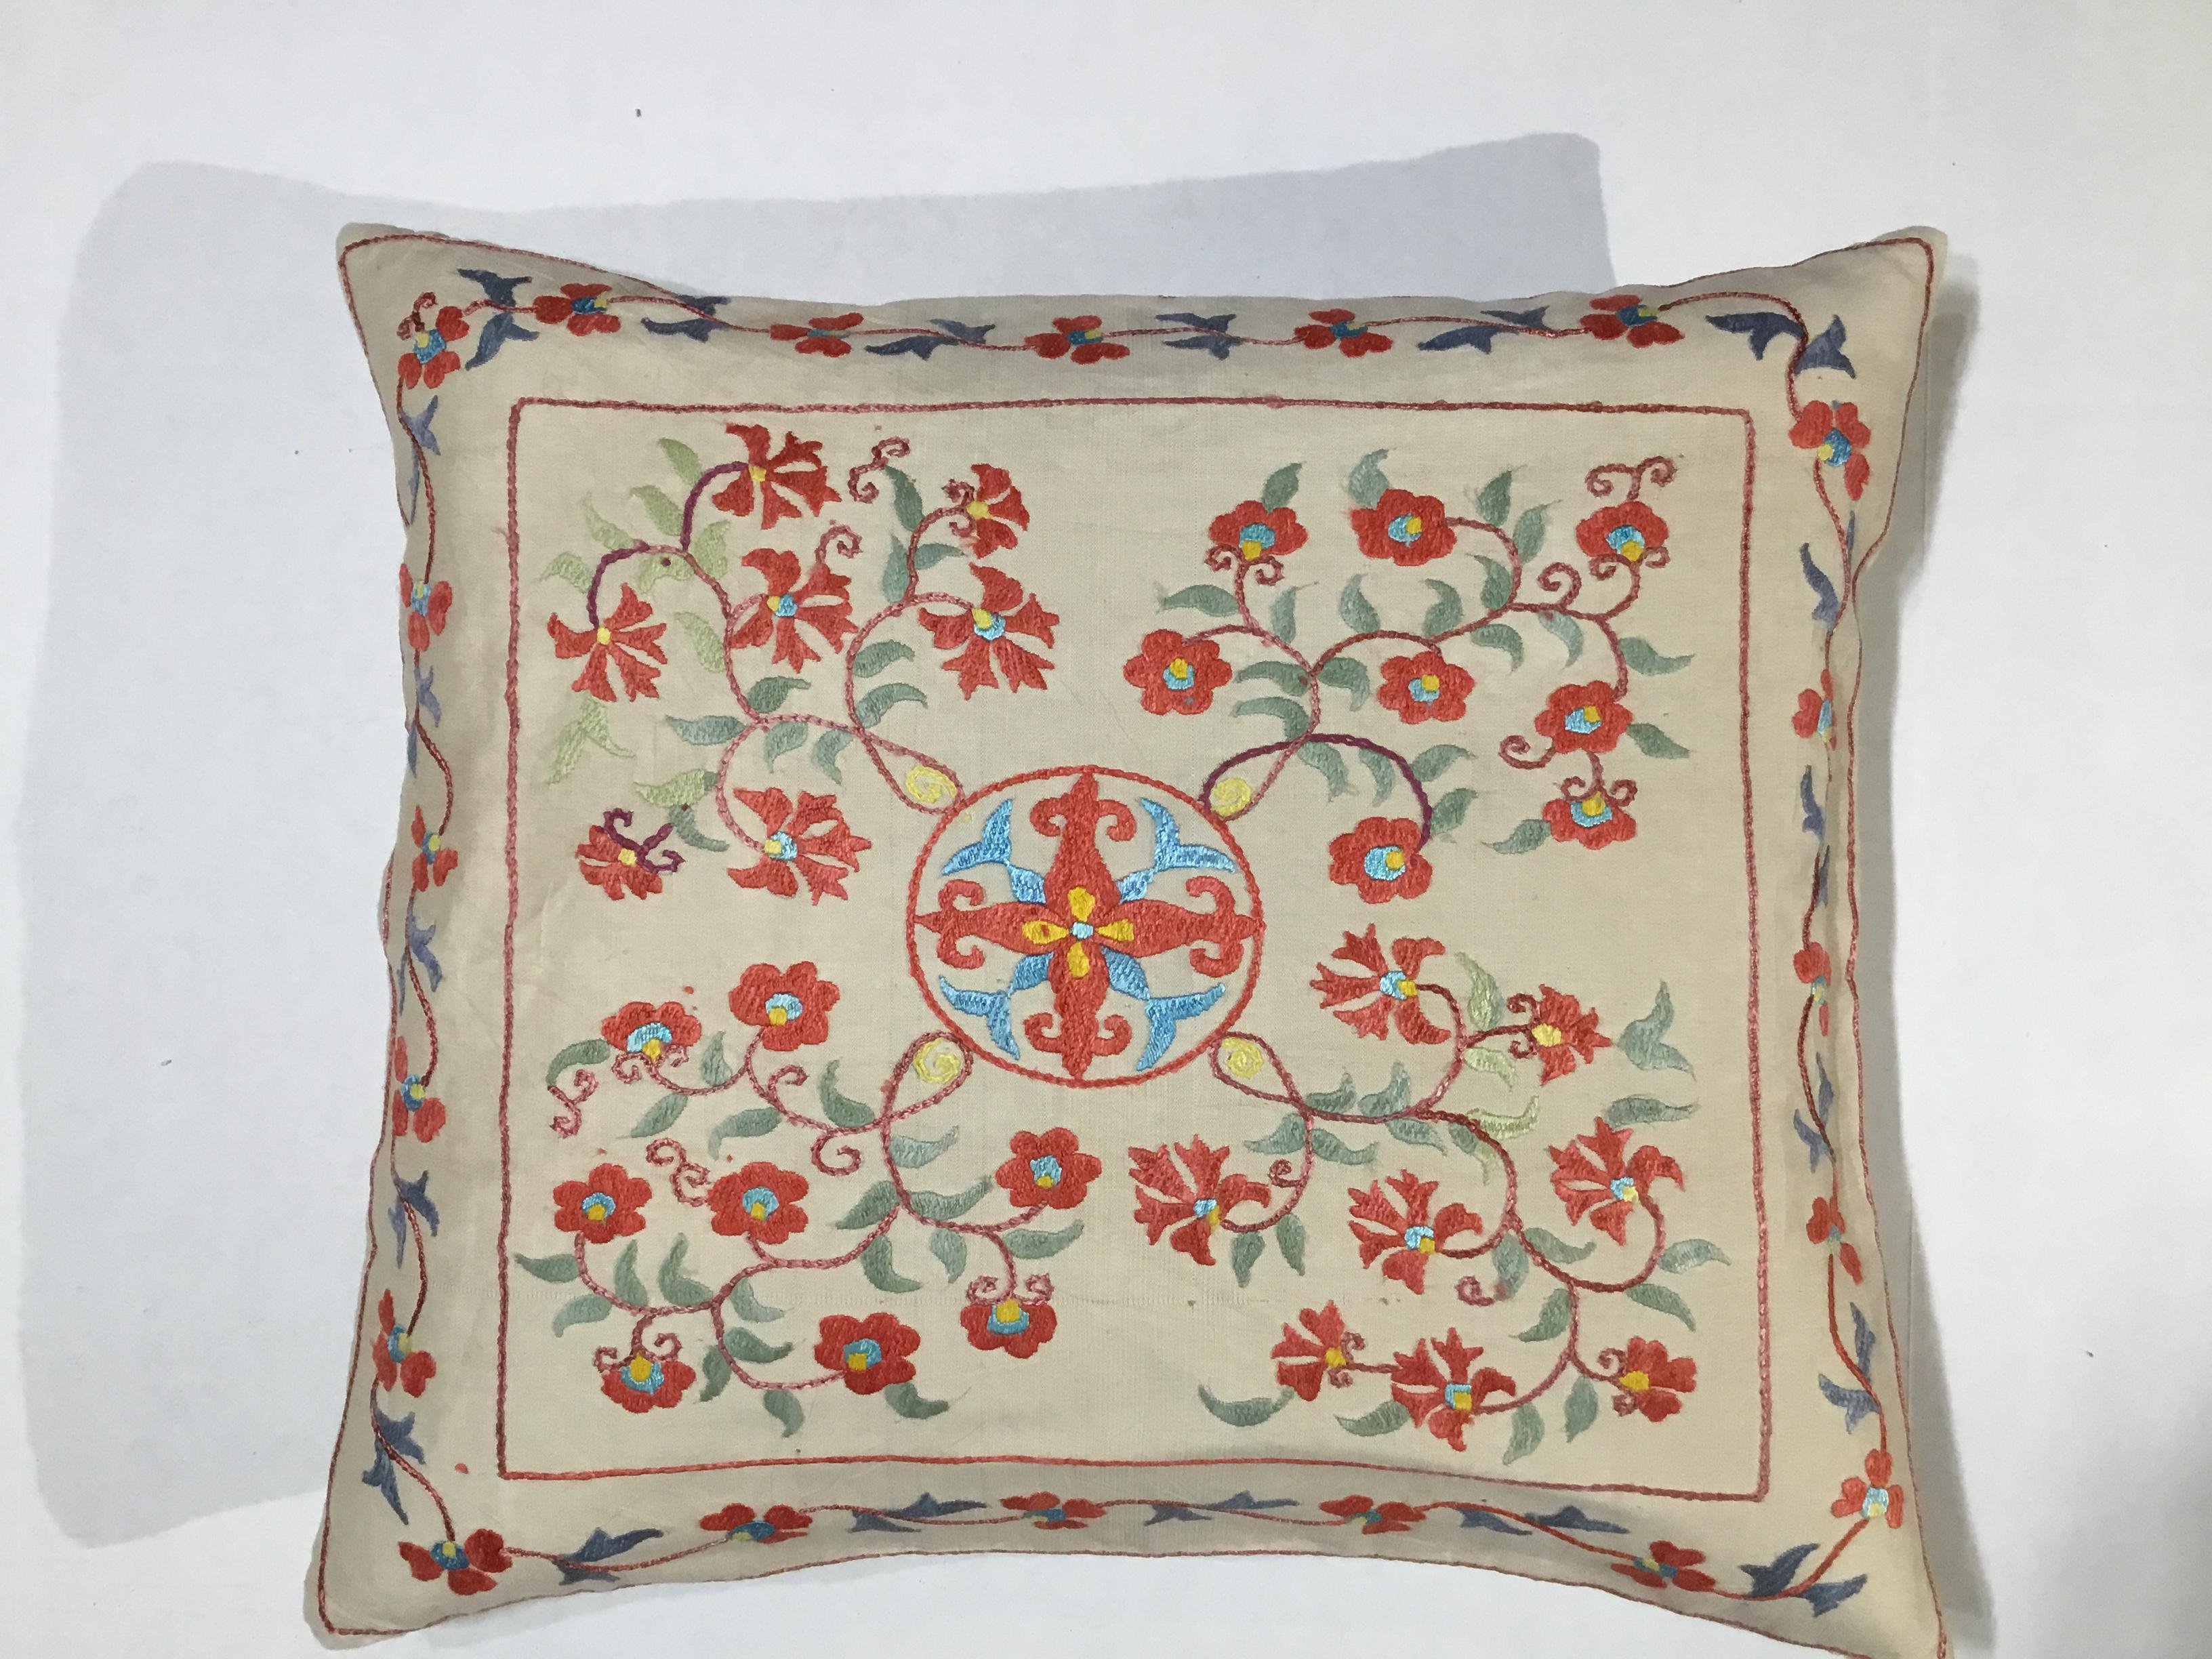 Beautiful pillow made of hand embroidery silk on cream color cotton background, flowers and vine motifs ,cotton backing with zipper, fresh new insert.